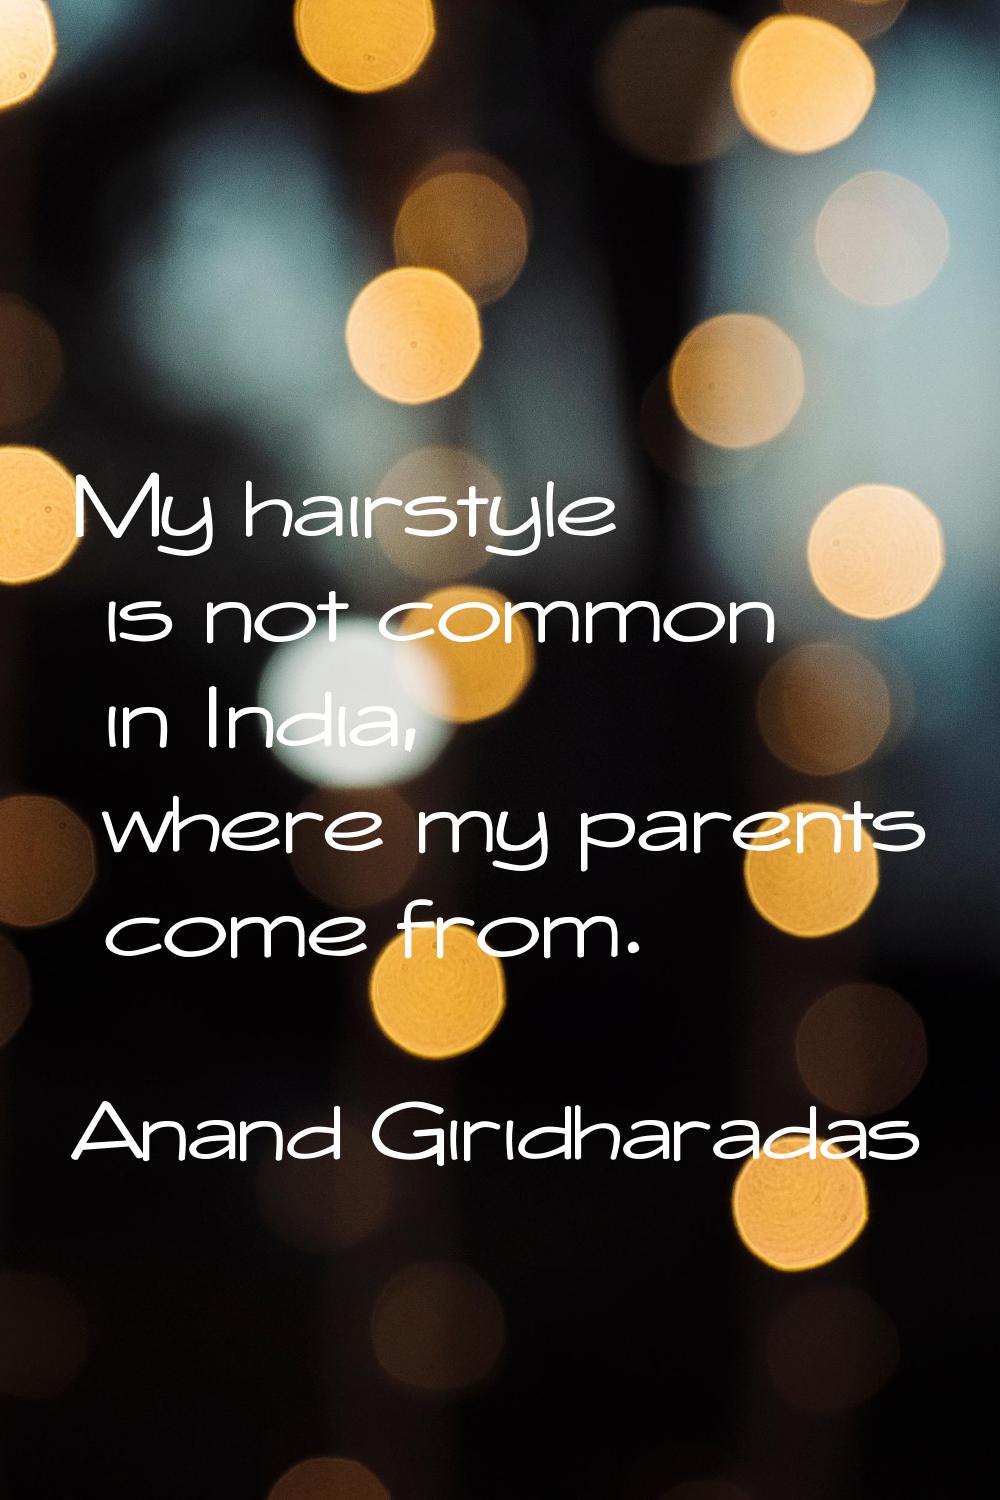 My hairstyle is not common in India, where my parents come from.